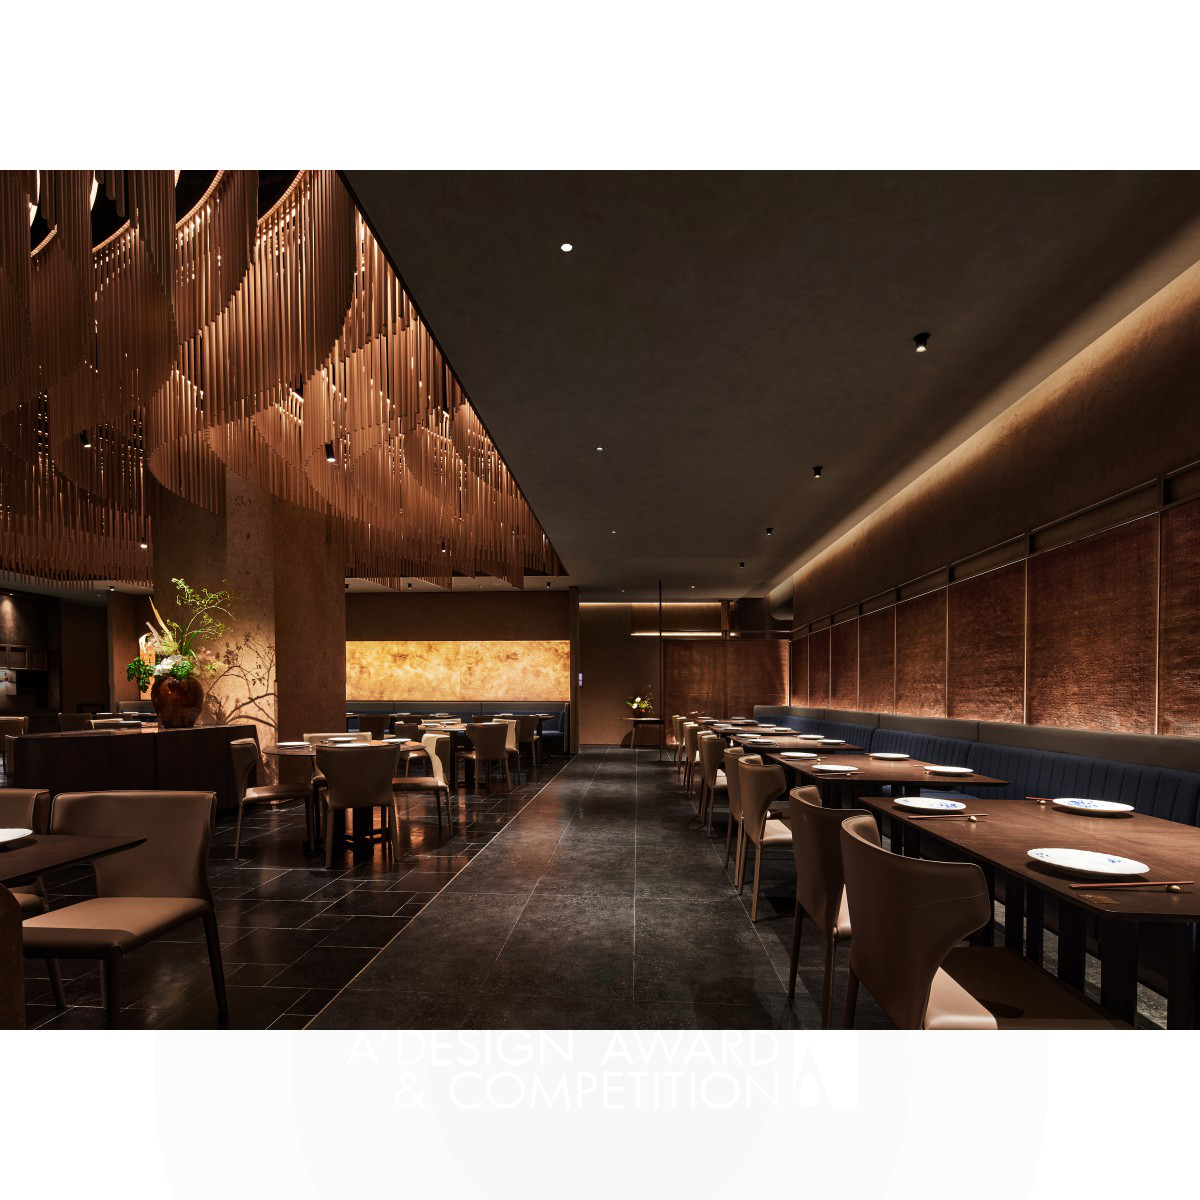 Feng Tian Restaurant Project by Zhang Qiming